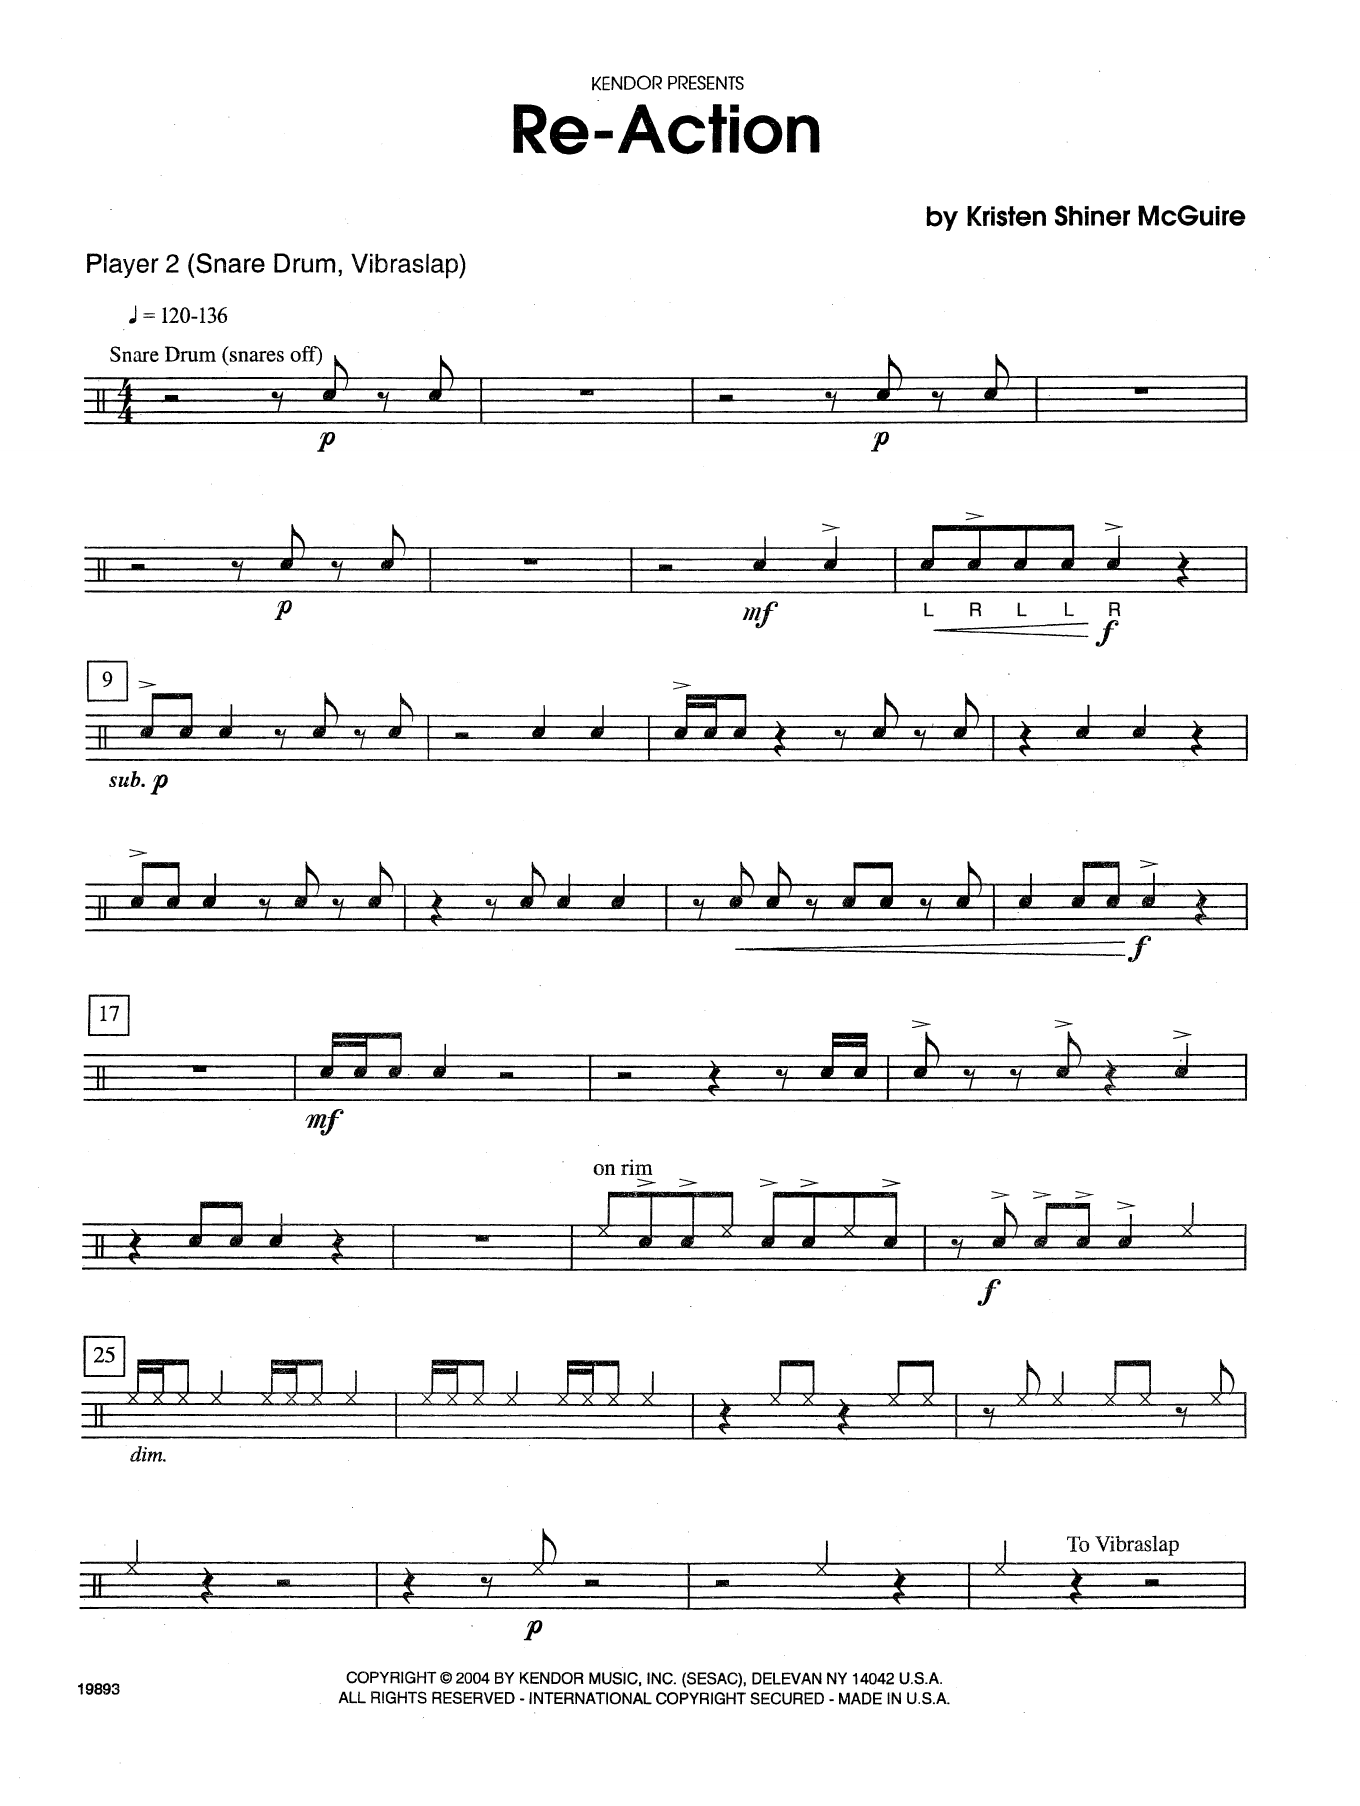 Download Kristen Shiner-McGuire Re-Action - Percussion 2 Sheet Music